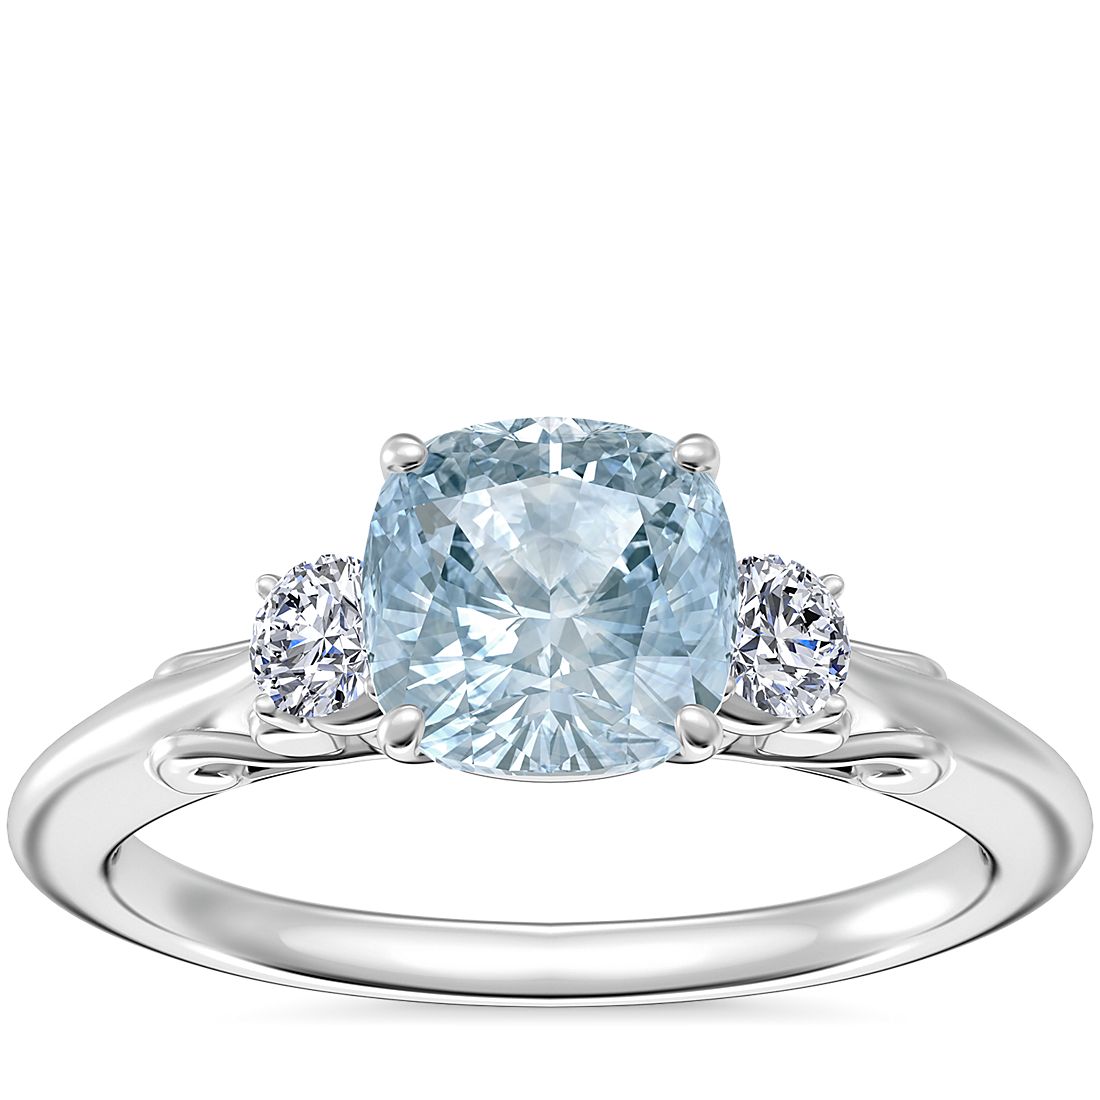 Vintage Three Stone Engagement Ring with Cushion Aquamarine in 14k White Gold (6.5mm)